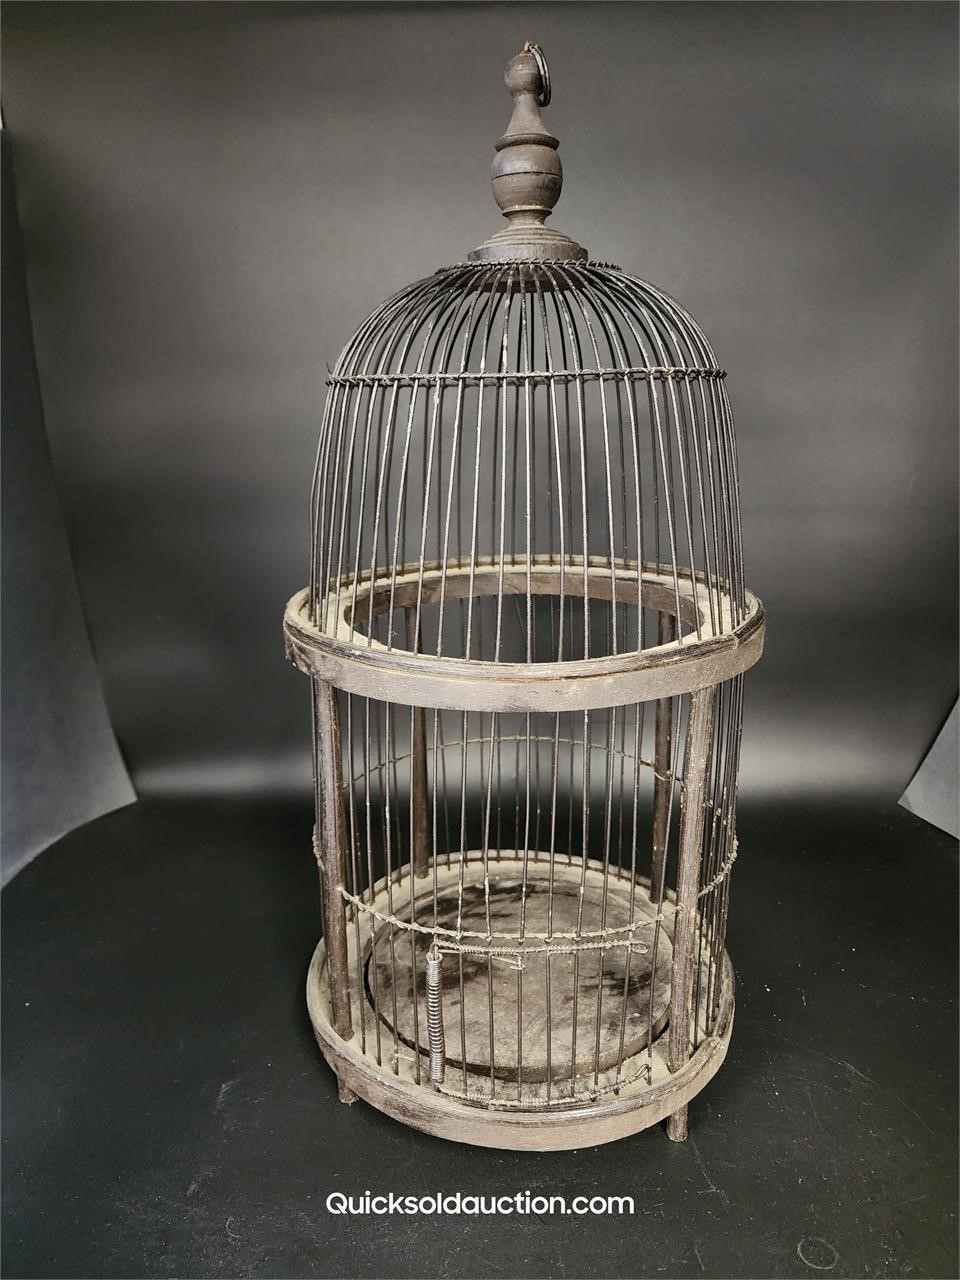 Ornamental Bird Cage - Woo And Wire- Needs A Dust